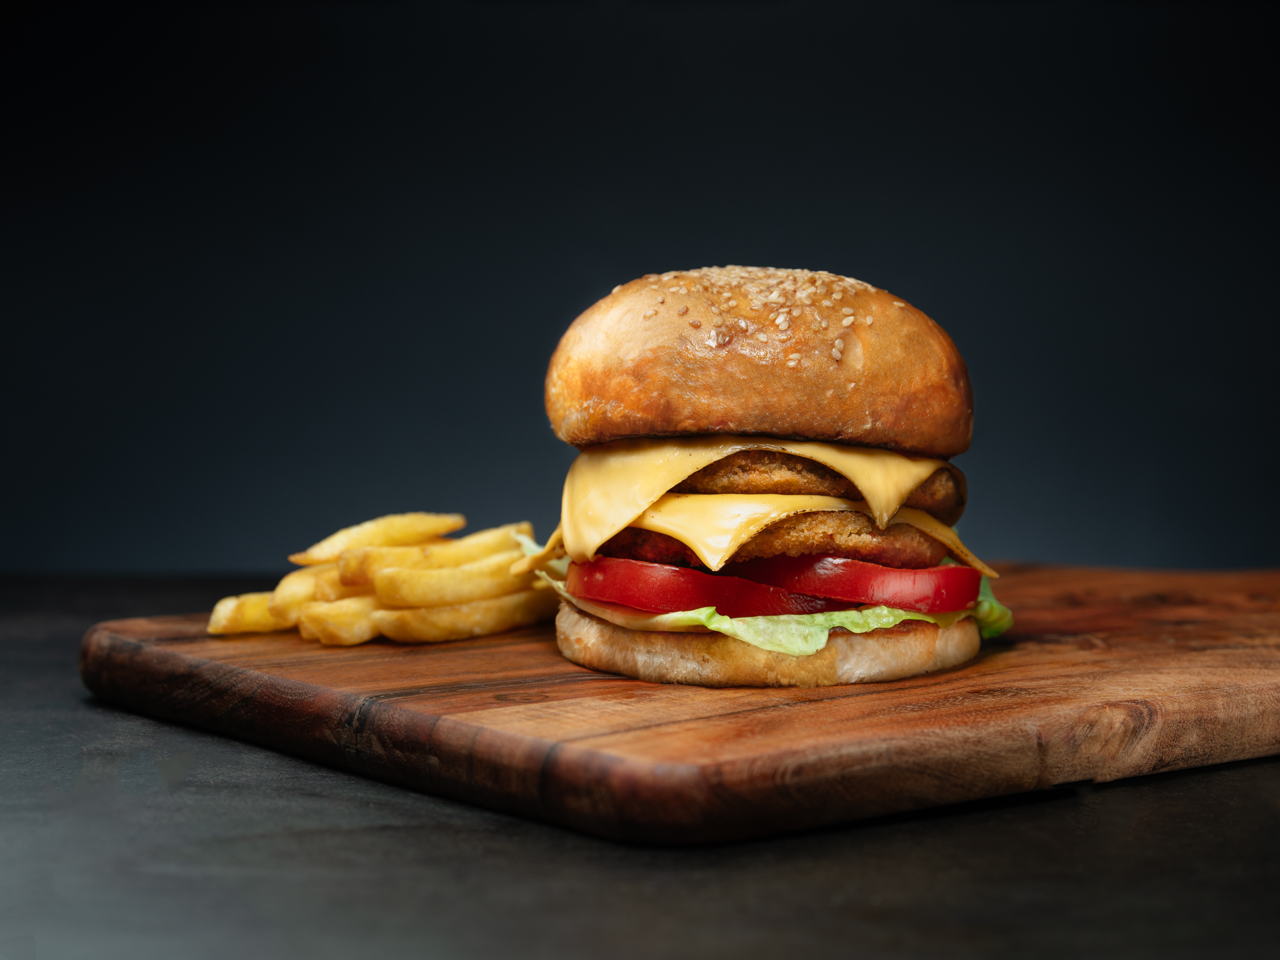 A juicy cheeseburger on a wooden cutting board, served with a side of golden french fries